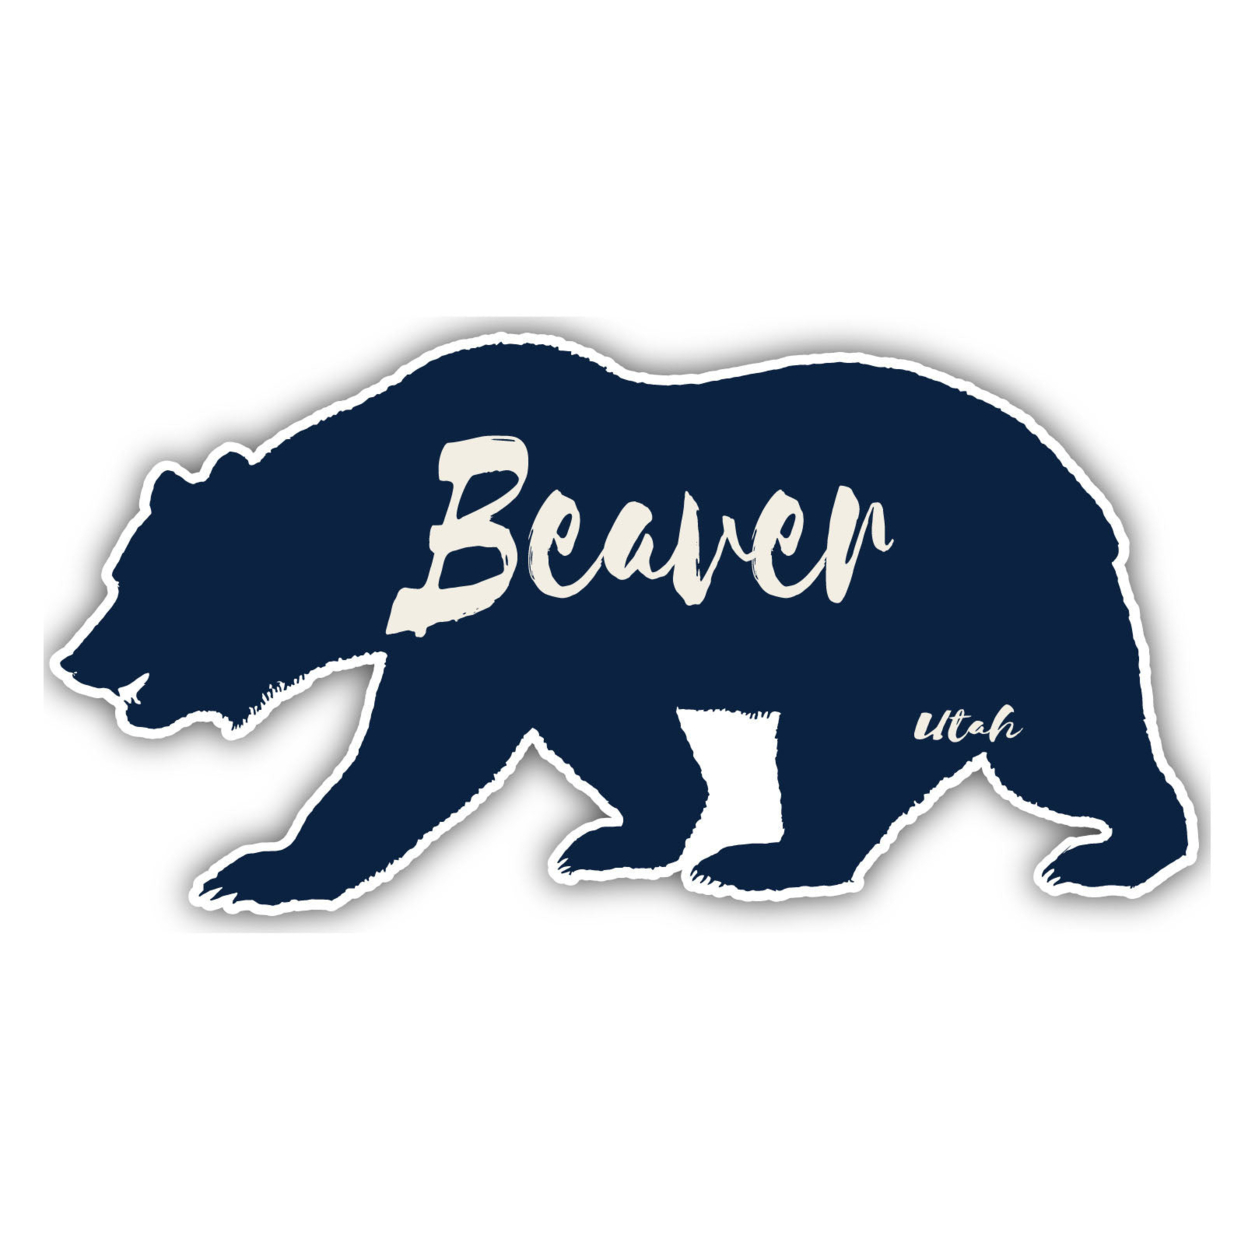 Beaver Utah Souvenir Decorative Stickers (Choose Theme And Size) - 4-Pack, 8-Inch, Adventures Awaits